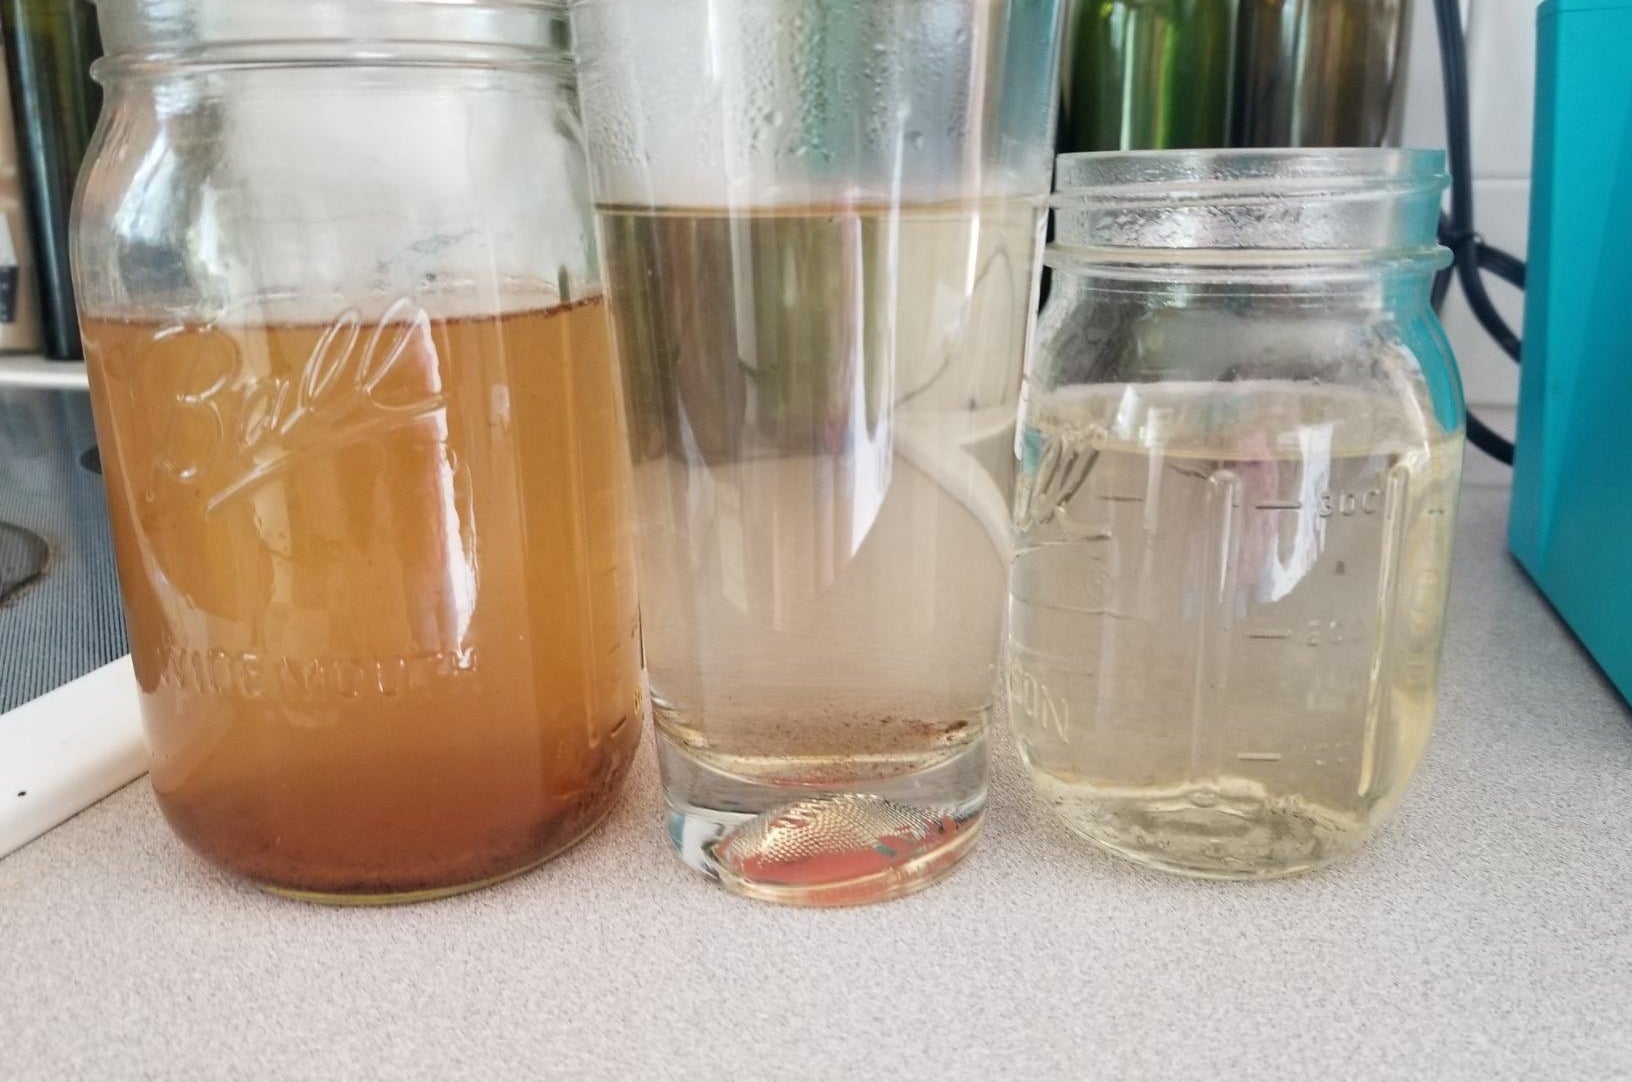 A glass on the left filled with brown water, a glass in the middle filled with cloudy water, and a glass on the right filled with clean water 